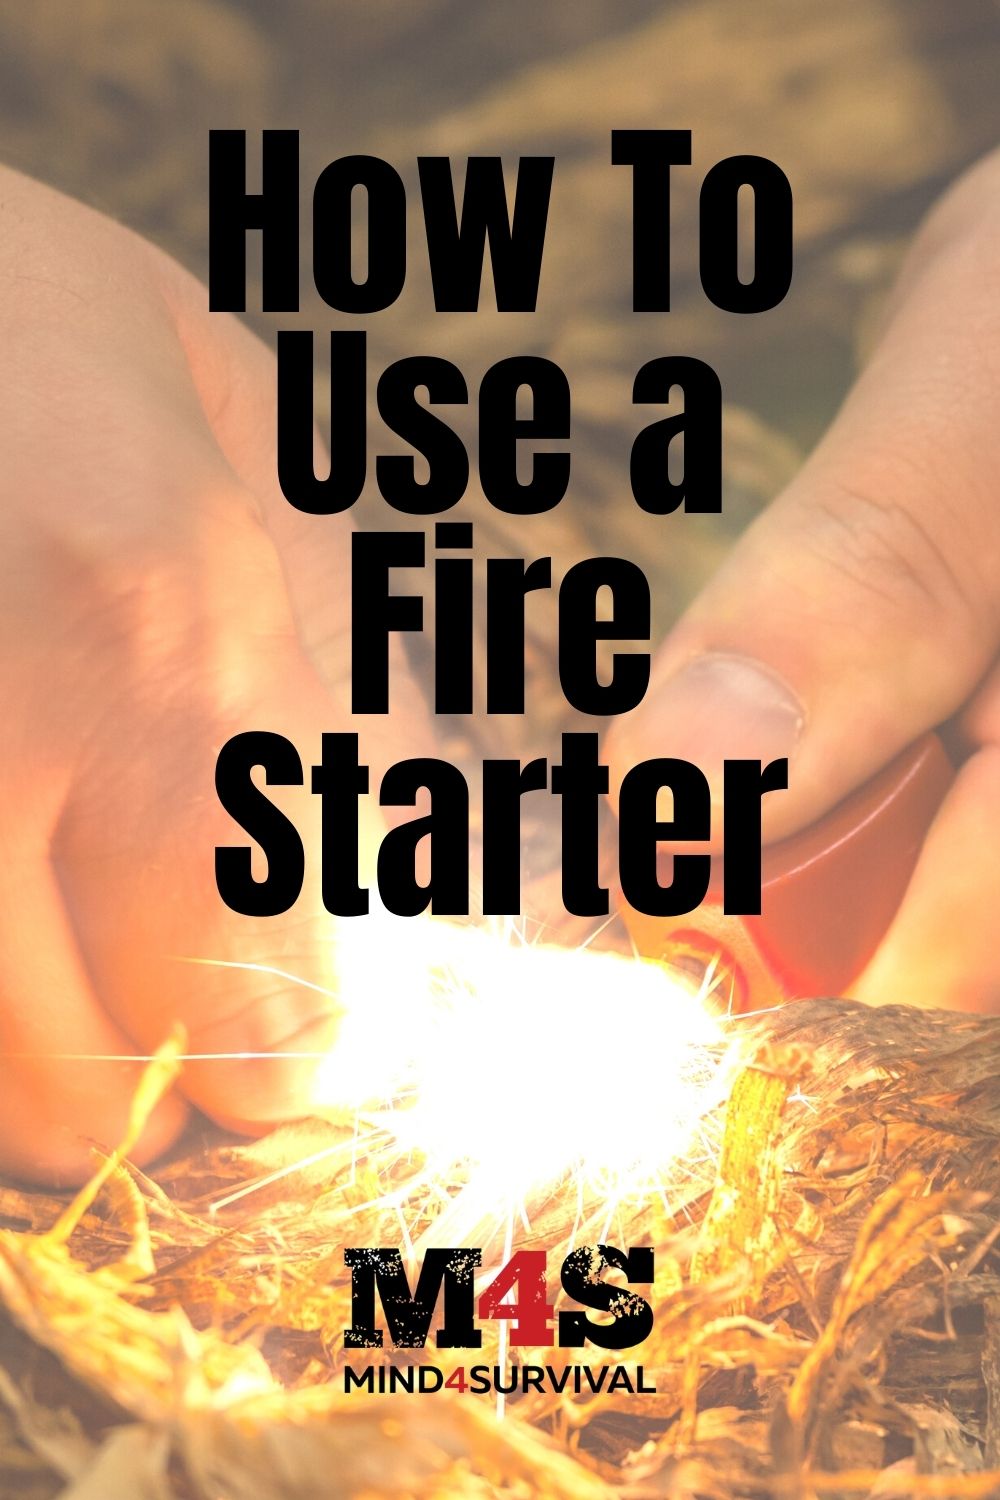 How to Use a Fire Starter - The Survival Guide (2022)